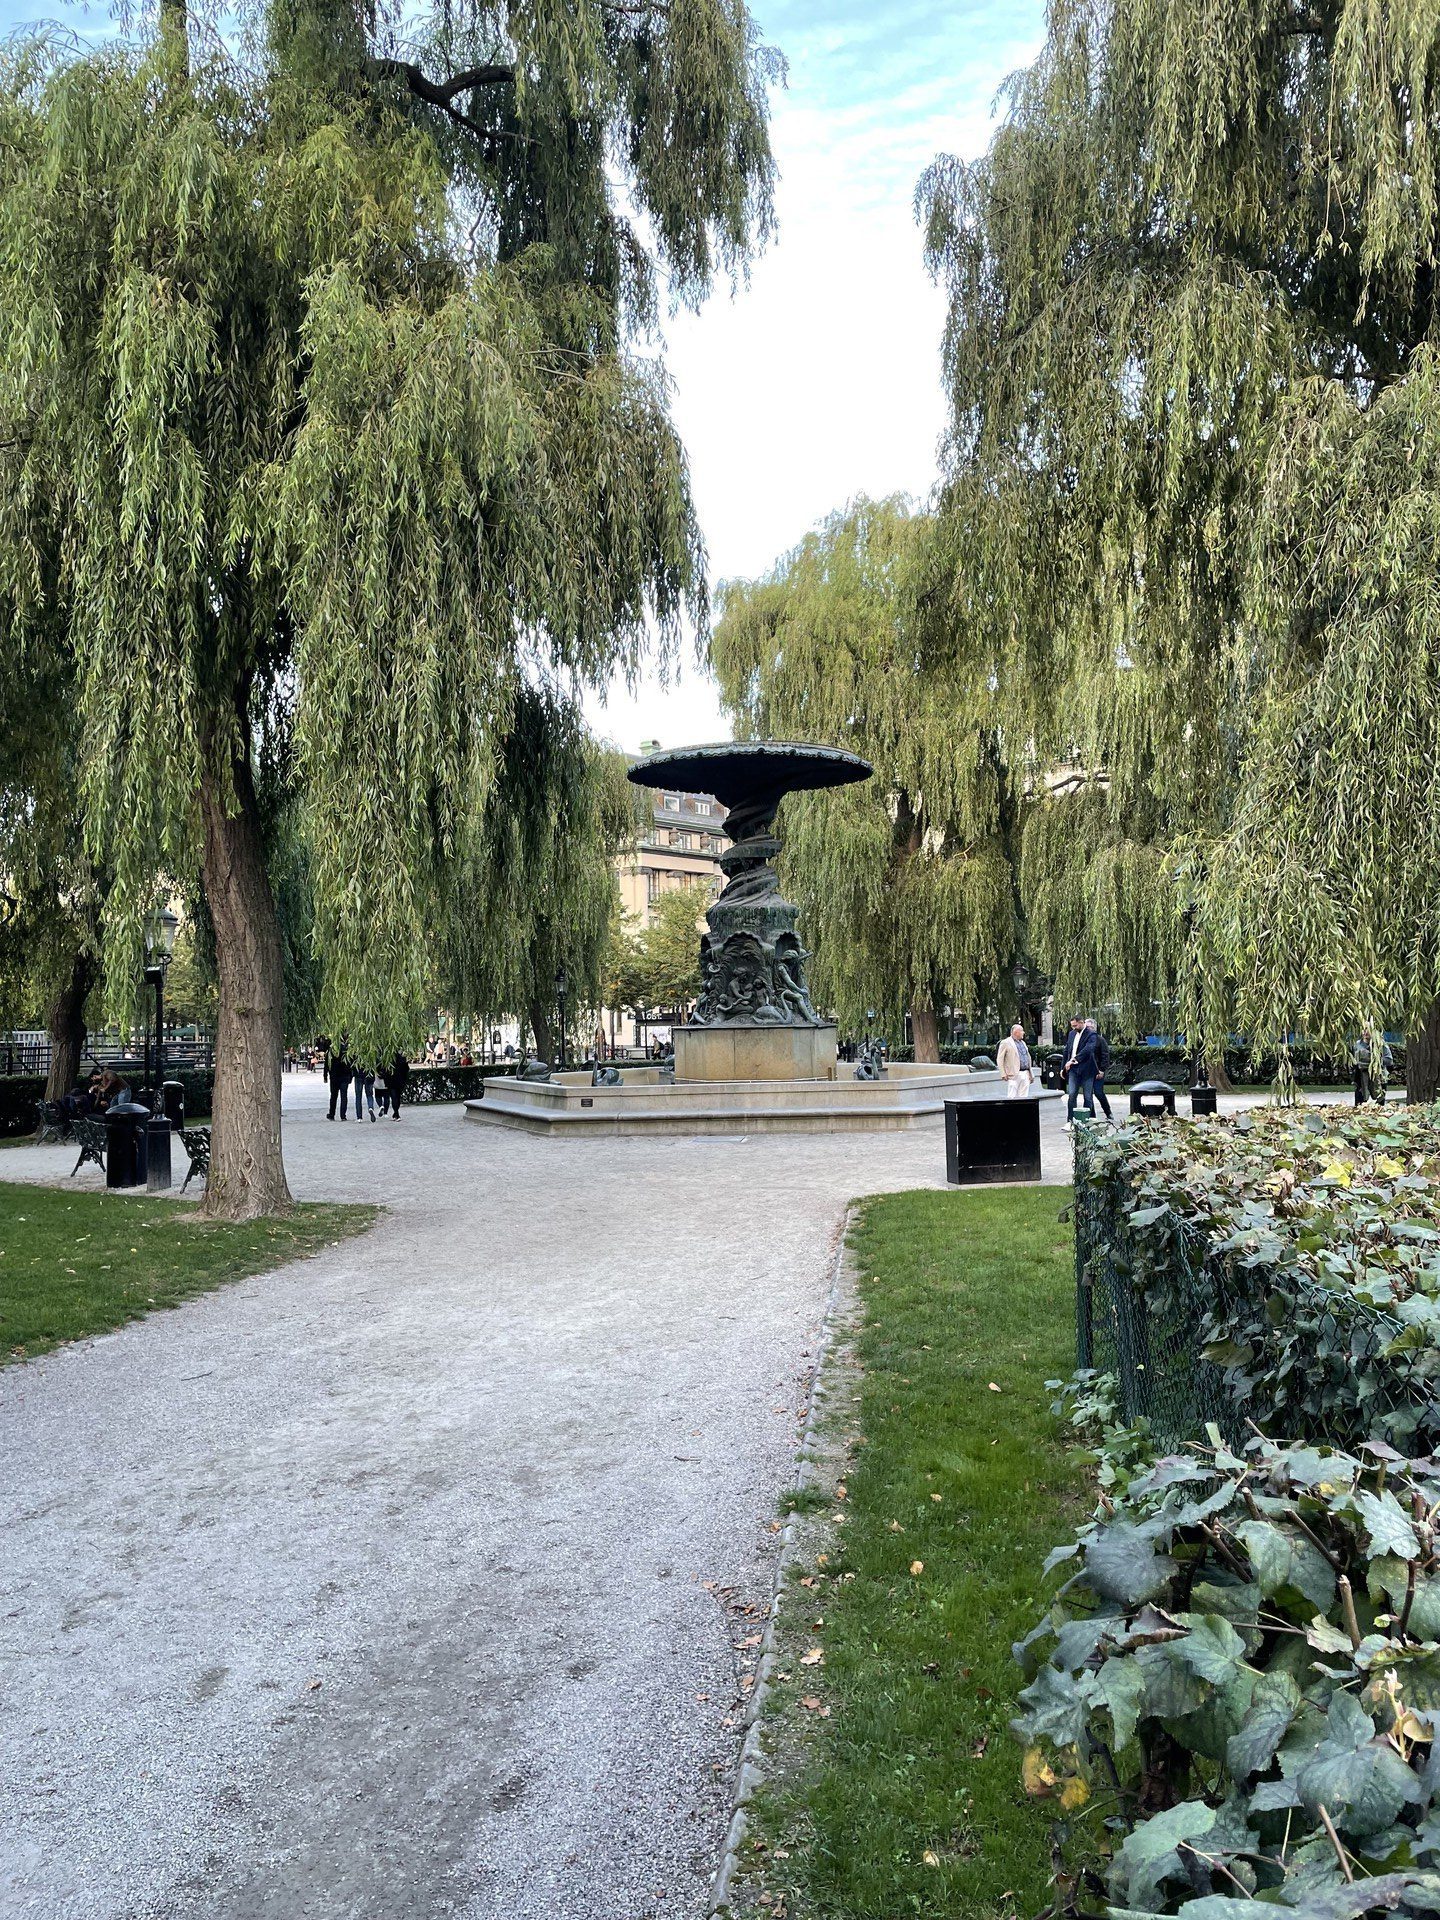 A big cast-iron fountain in a park, but with no water coming out of it.